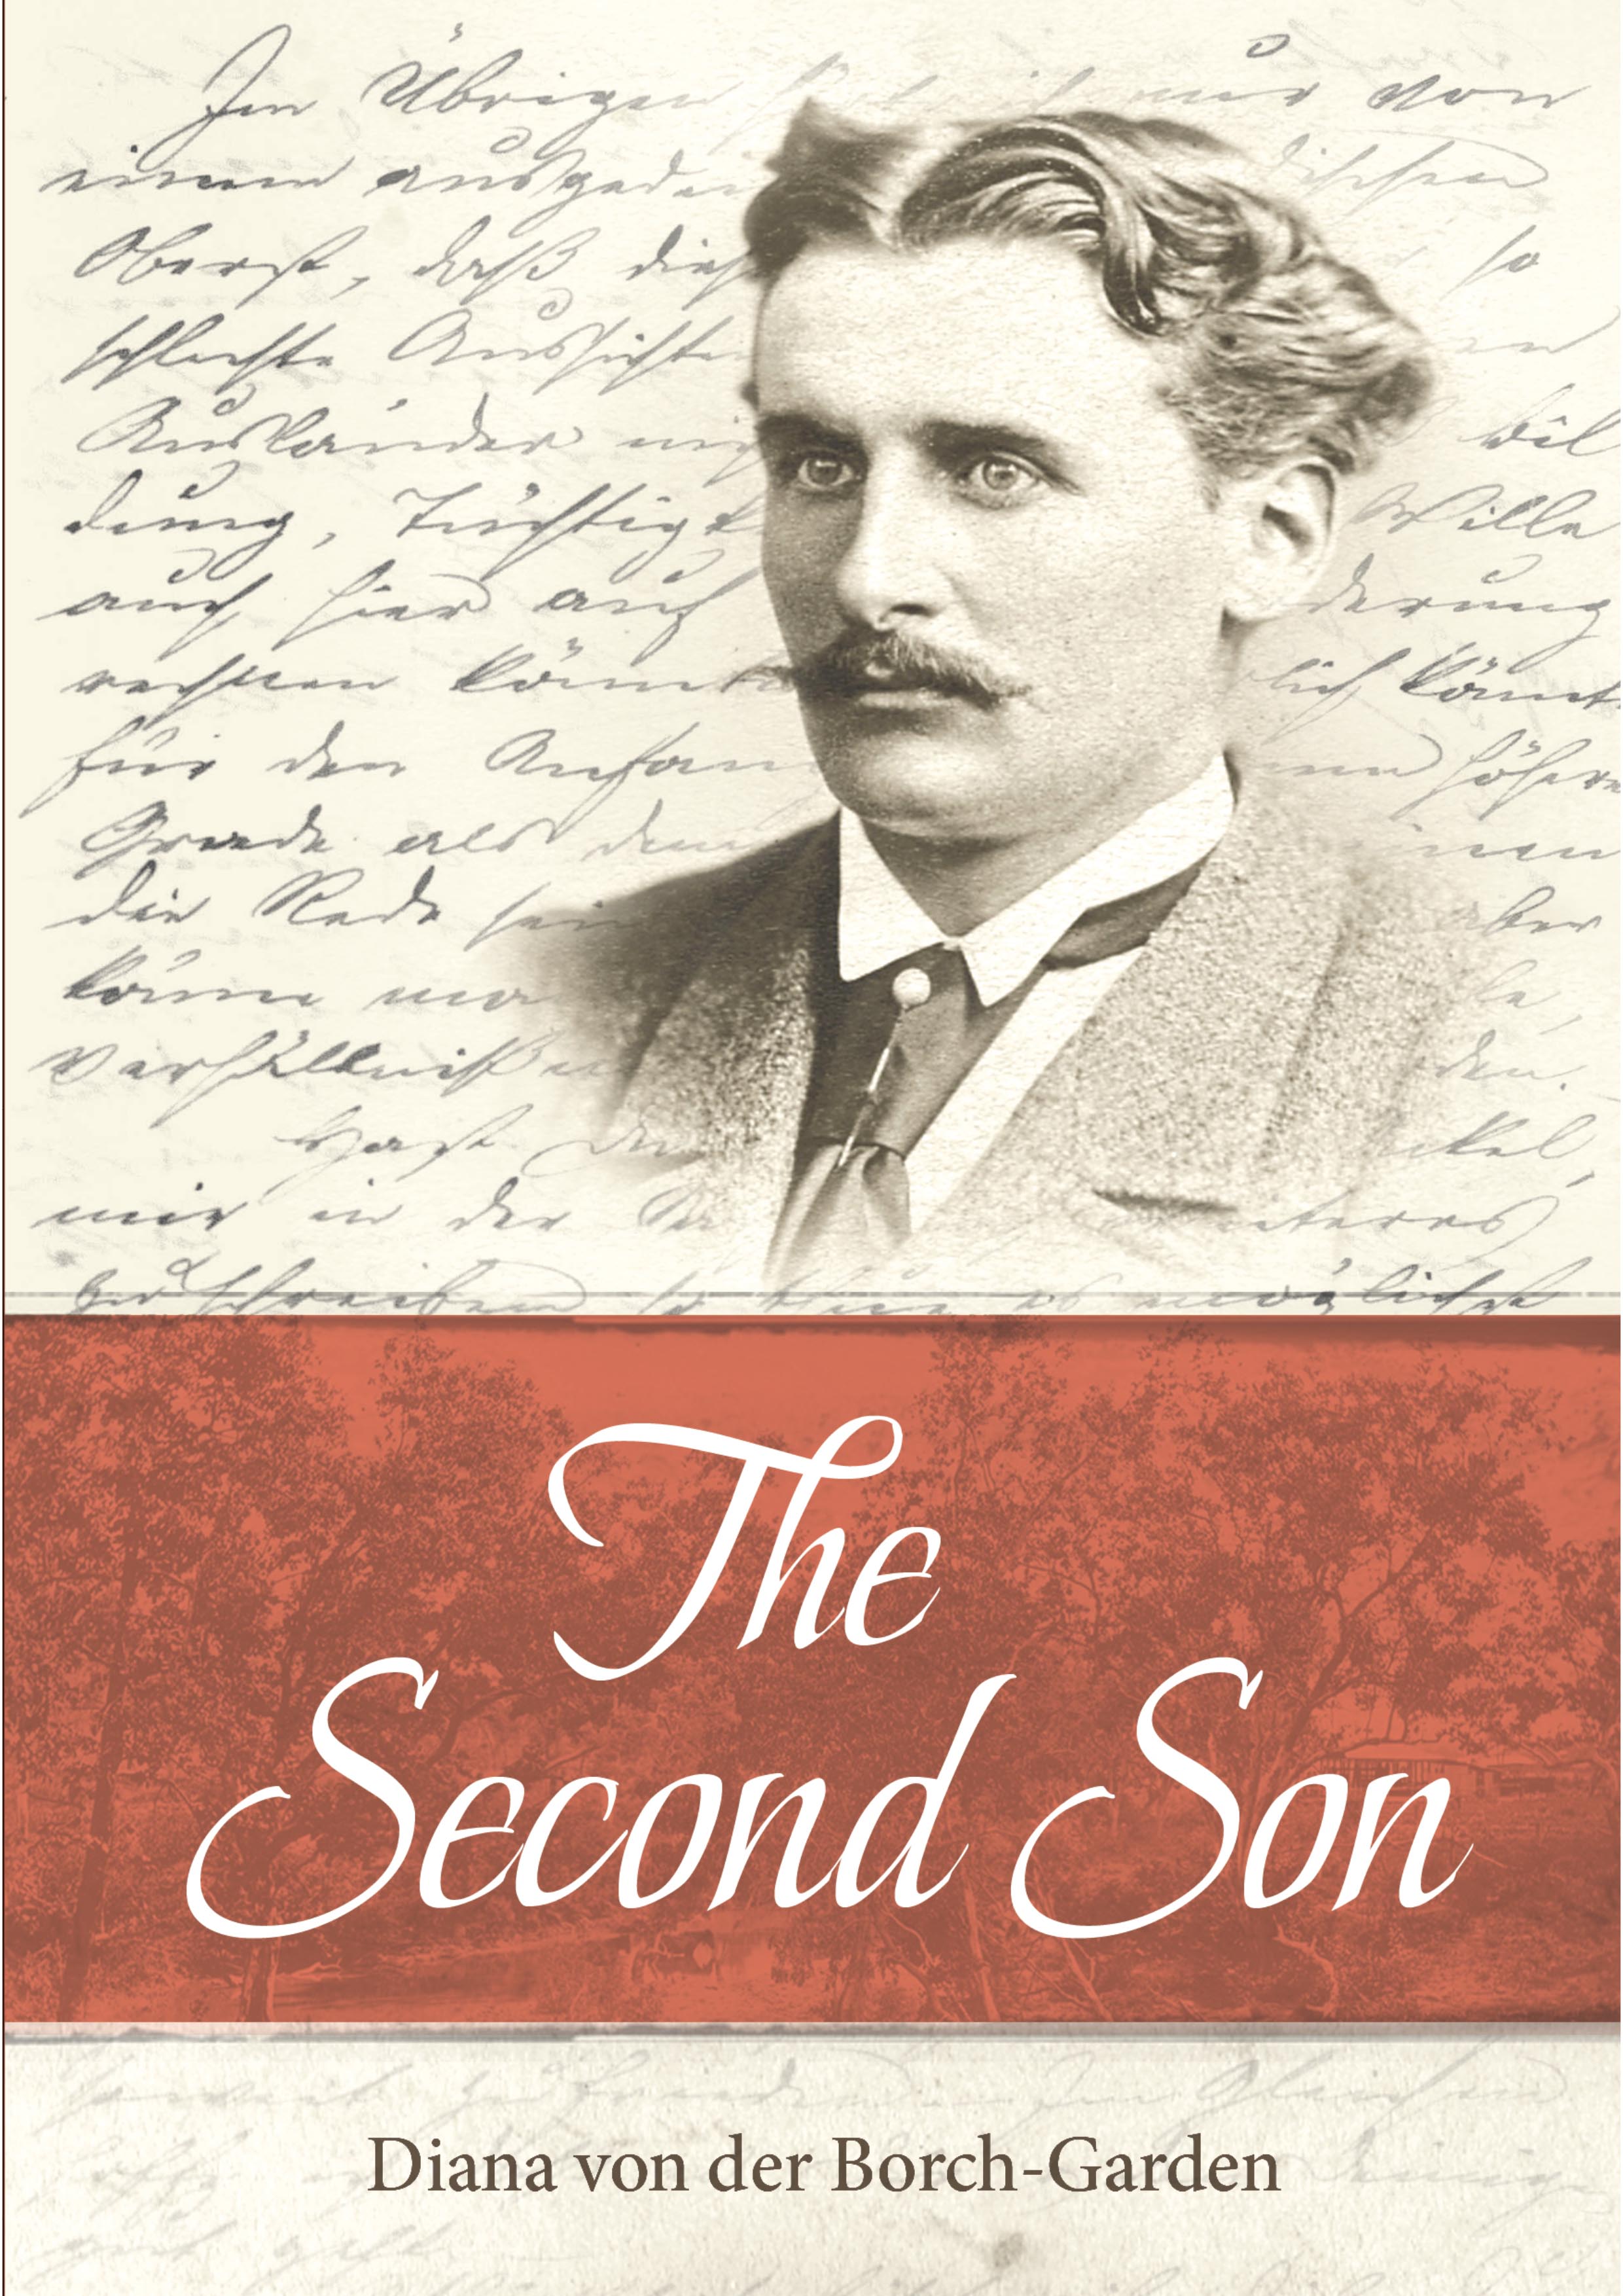  The Second Son